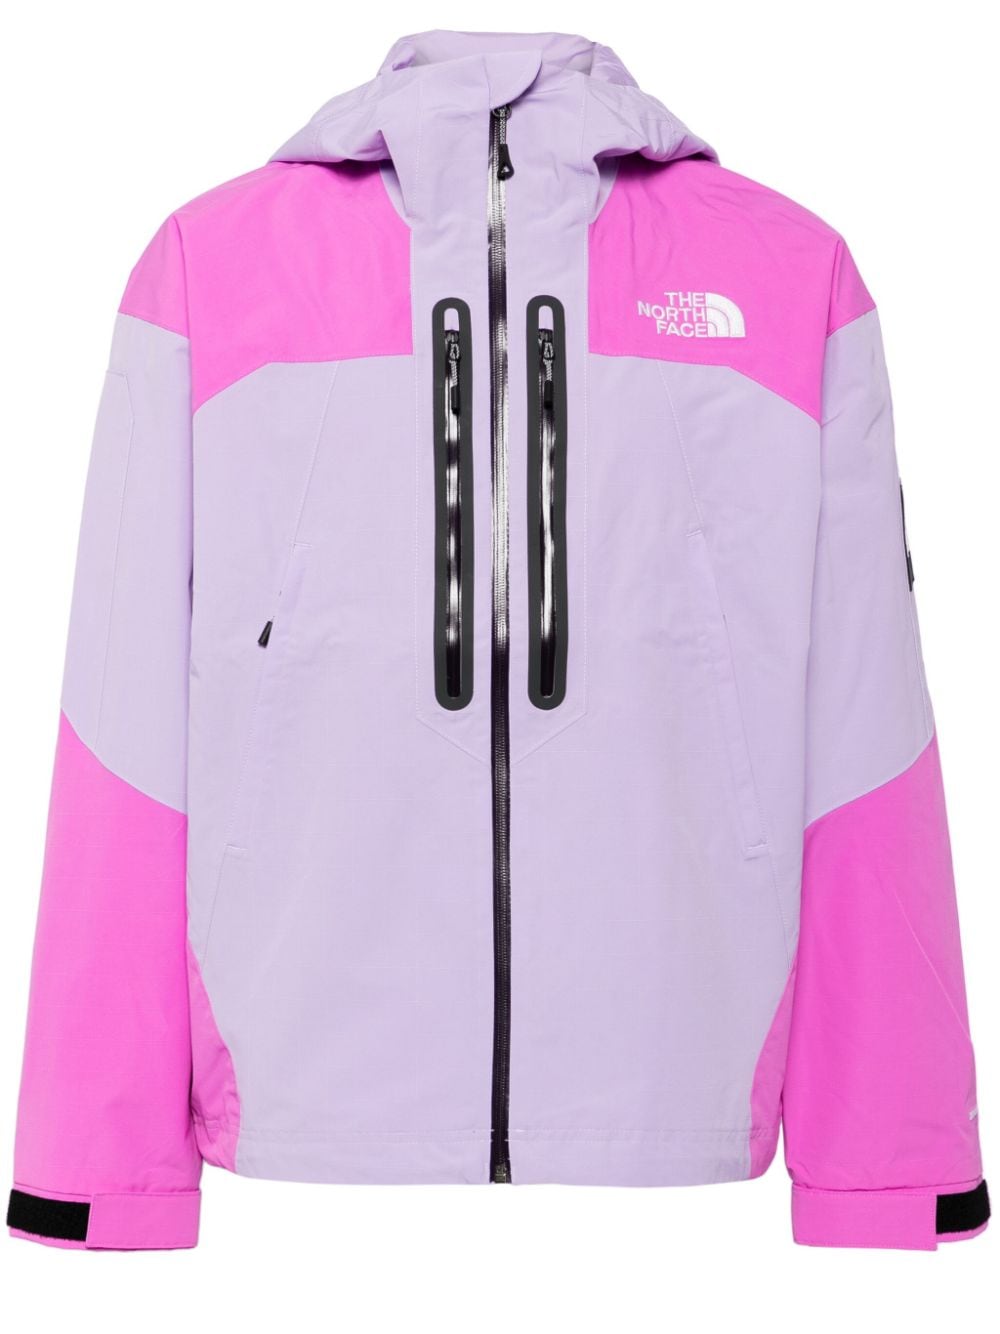 The North Face Transverse 2L DryVent™ hooded jacket - Purple von The North Face